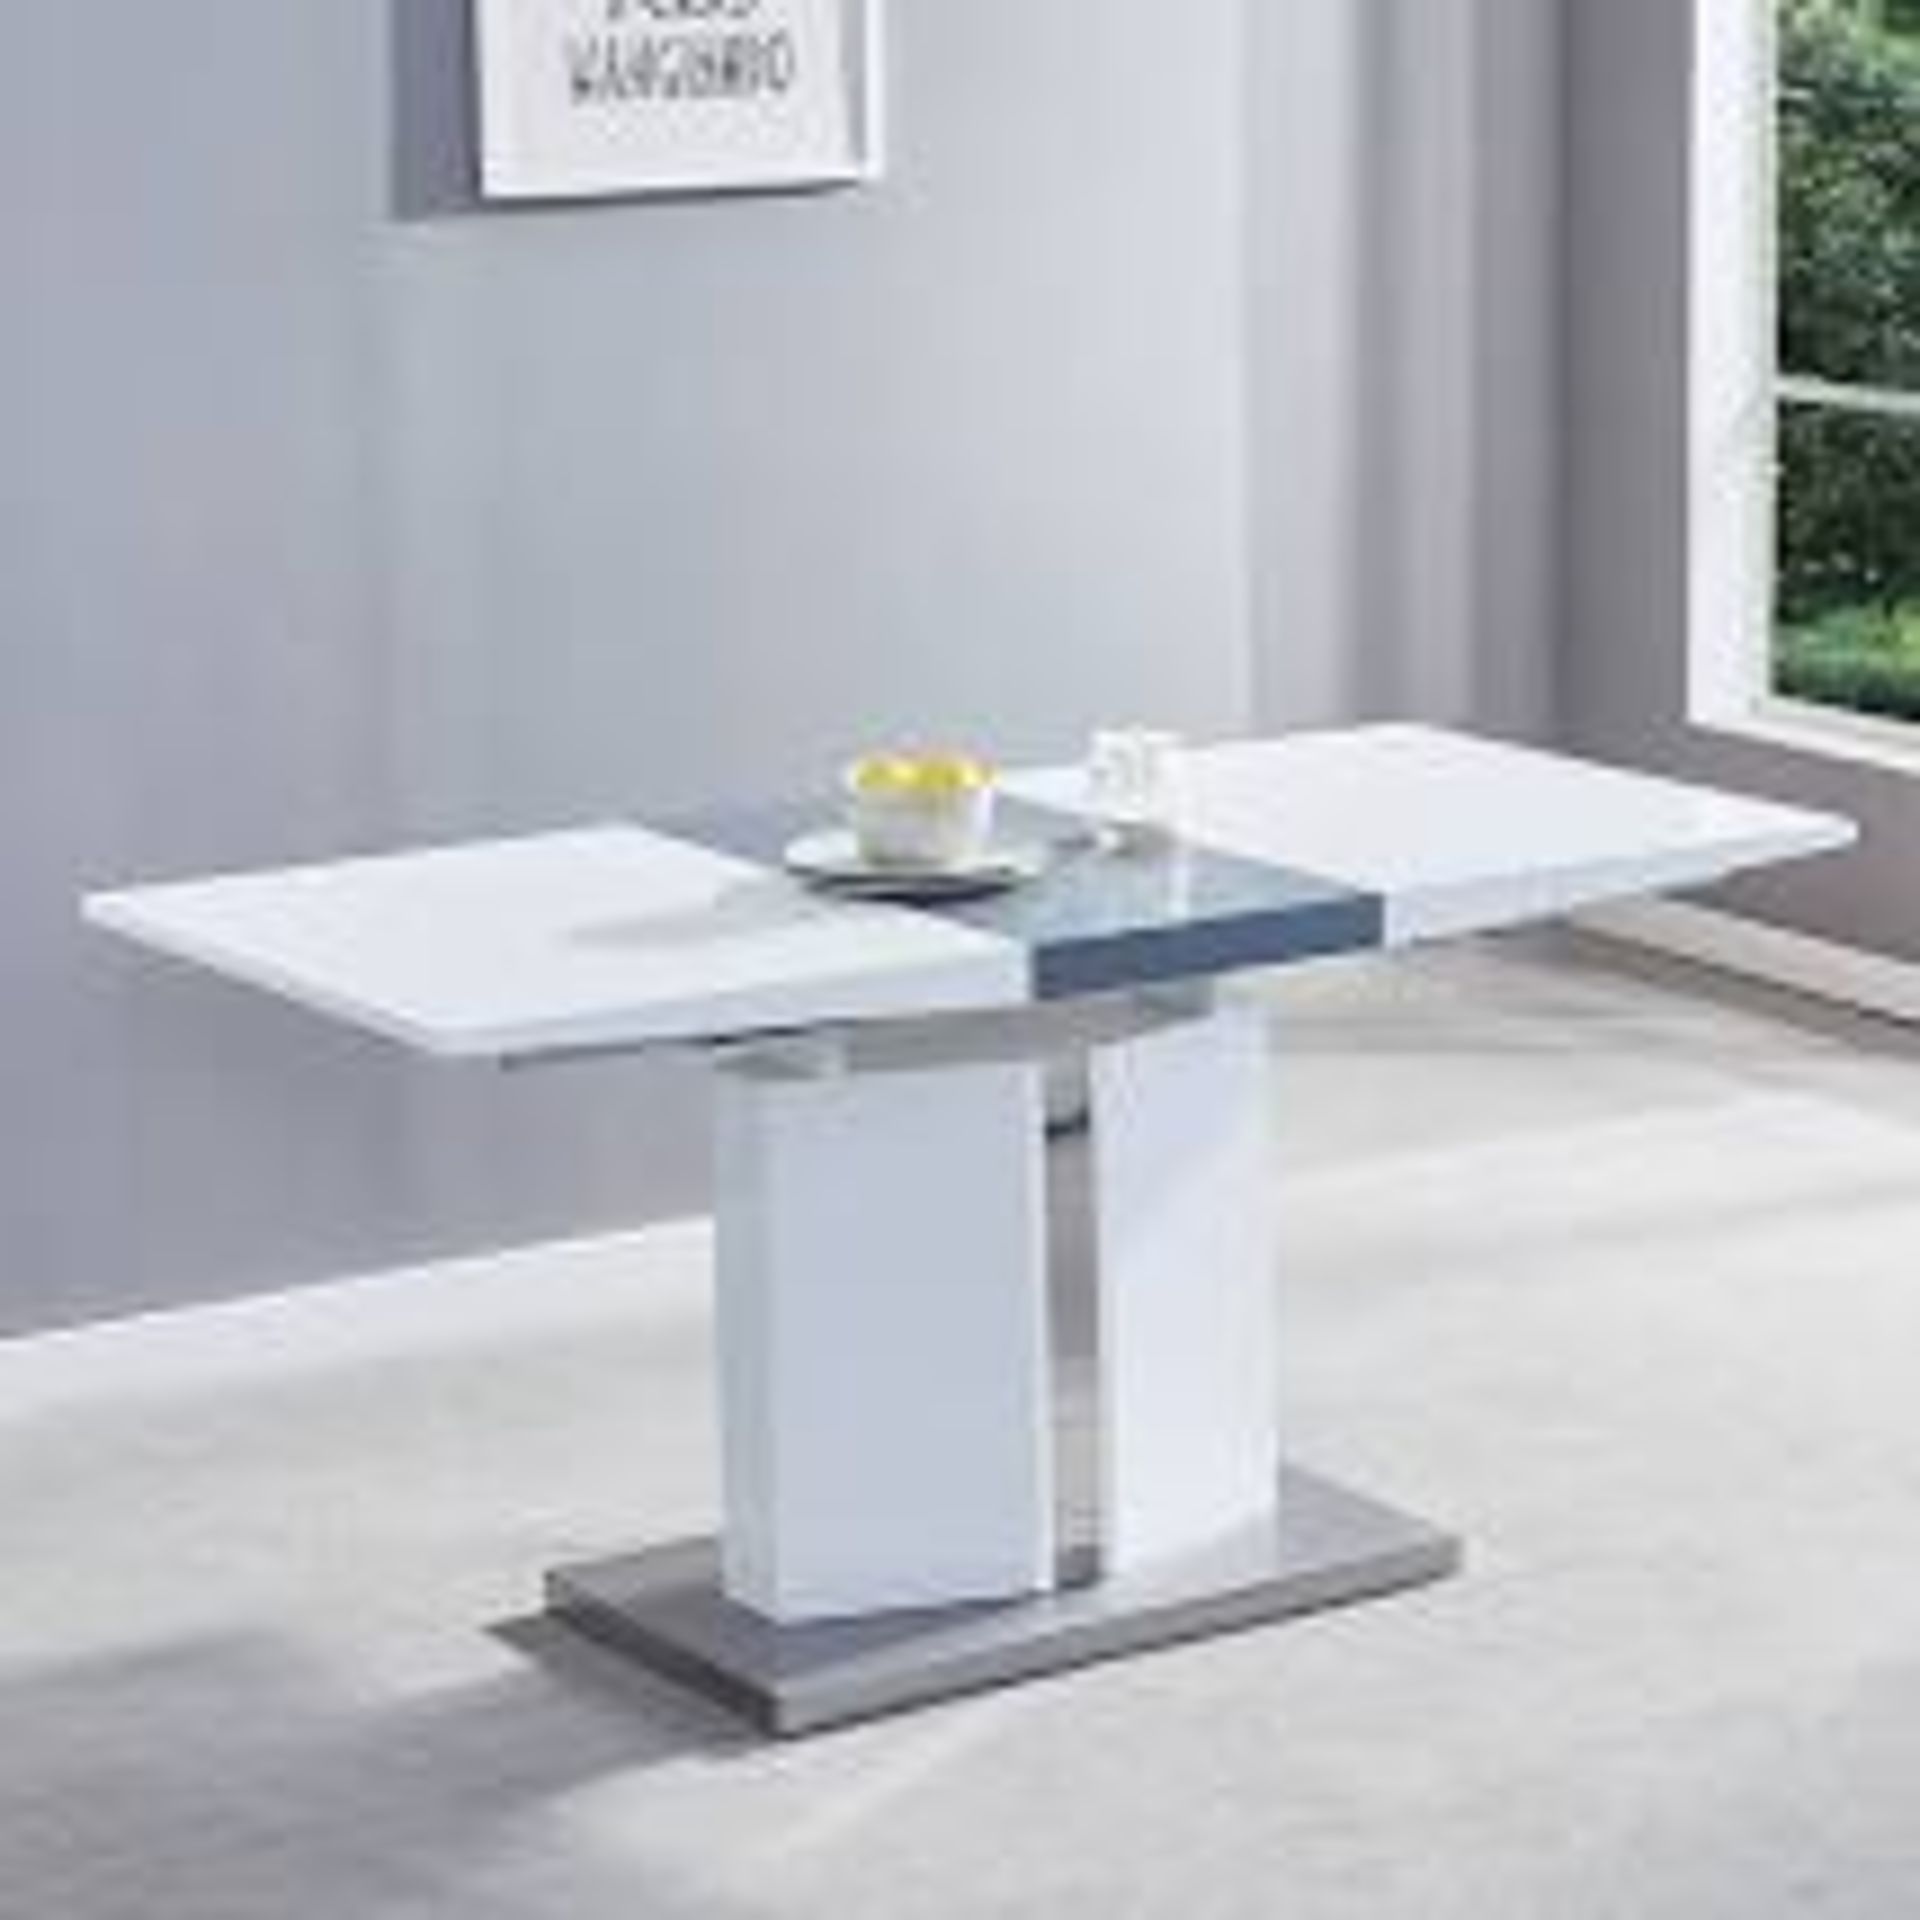 RRP £380 Boxed Belmonte Extenable Dining Table